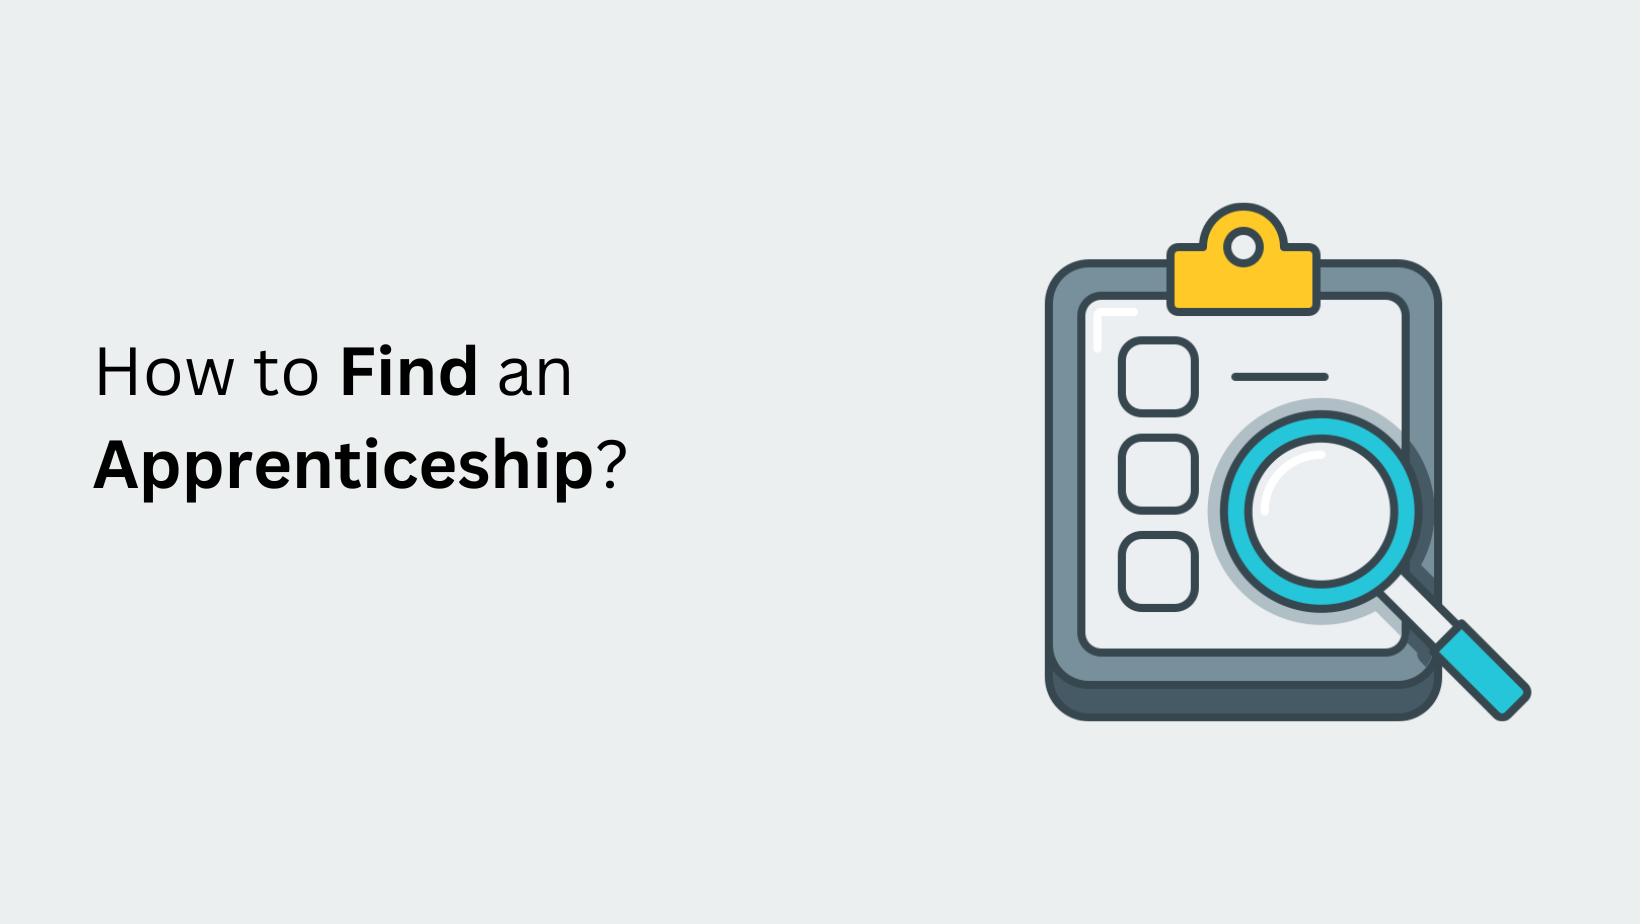 How to Find an Apprenticeship